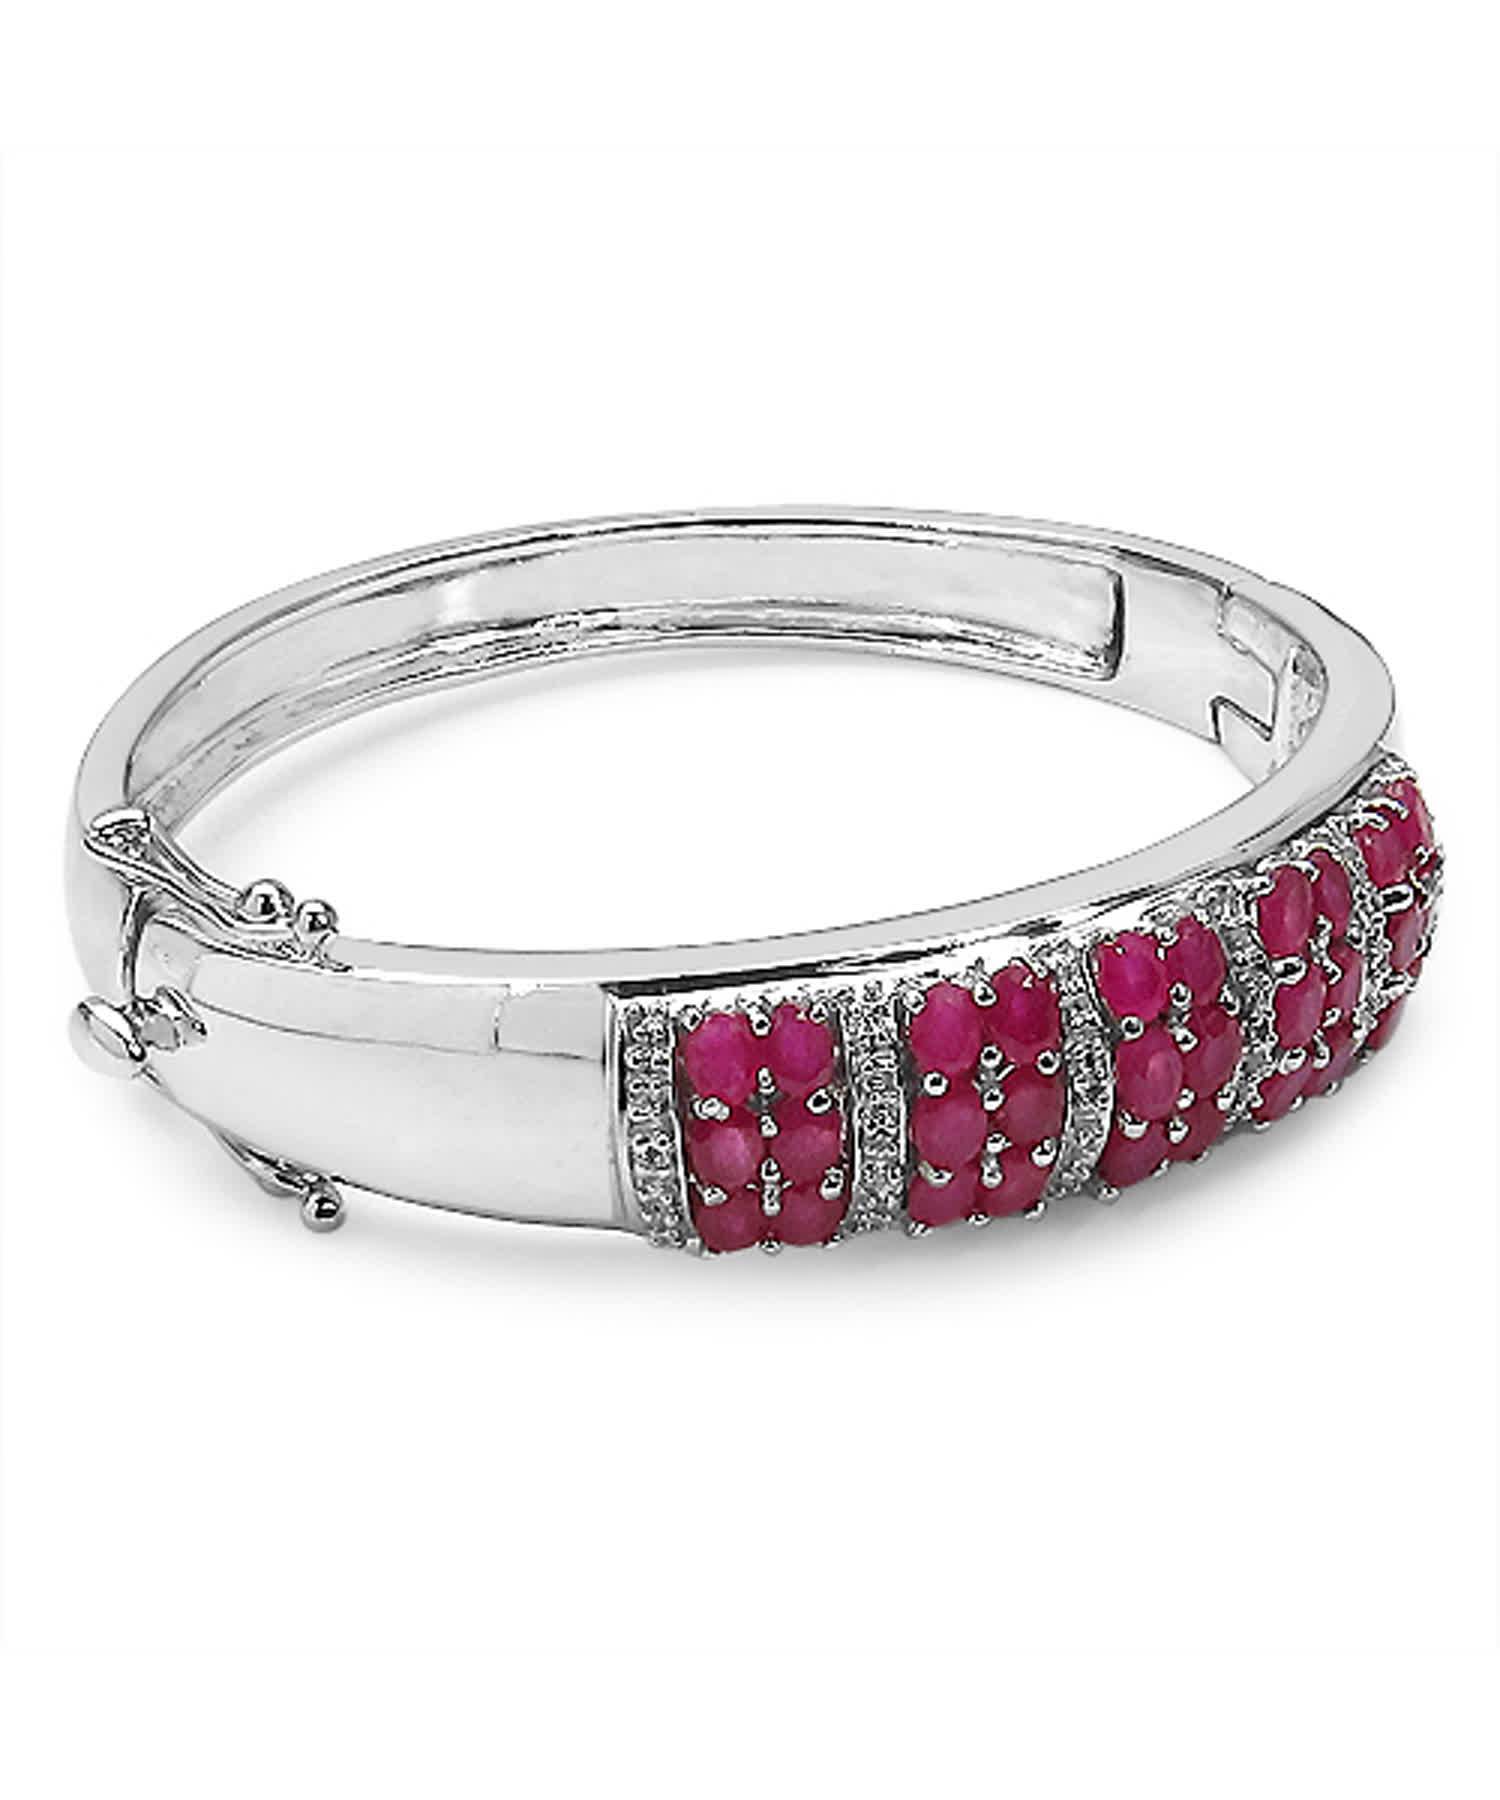 6.65ctw Natural Ruby and Topaz Rhodium Plated 925 Sterling Silver Bangle Bracelet View 2